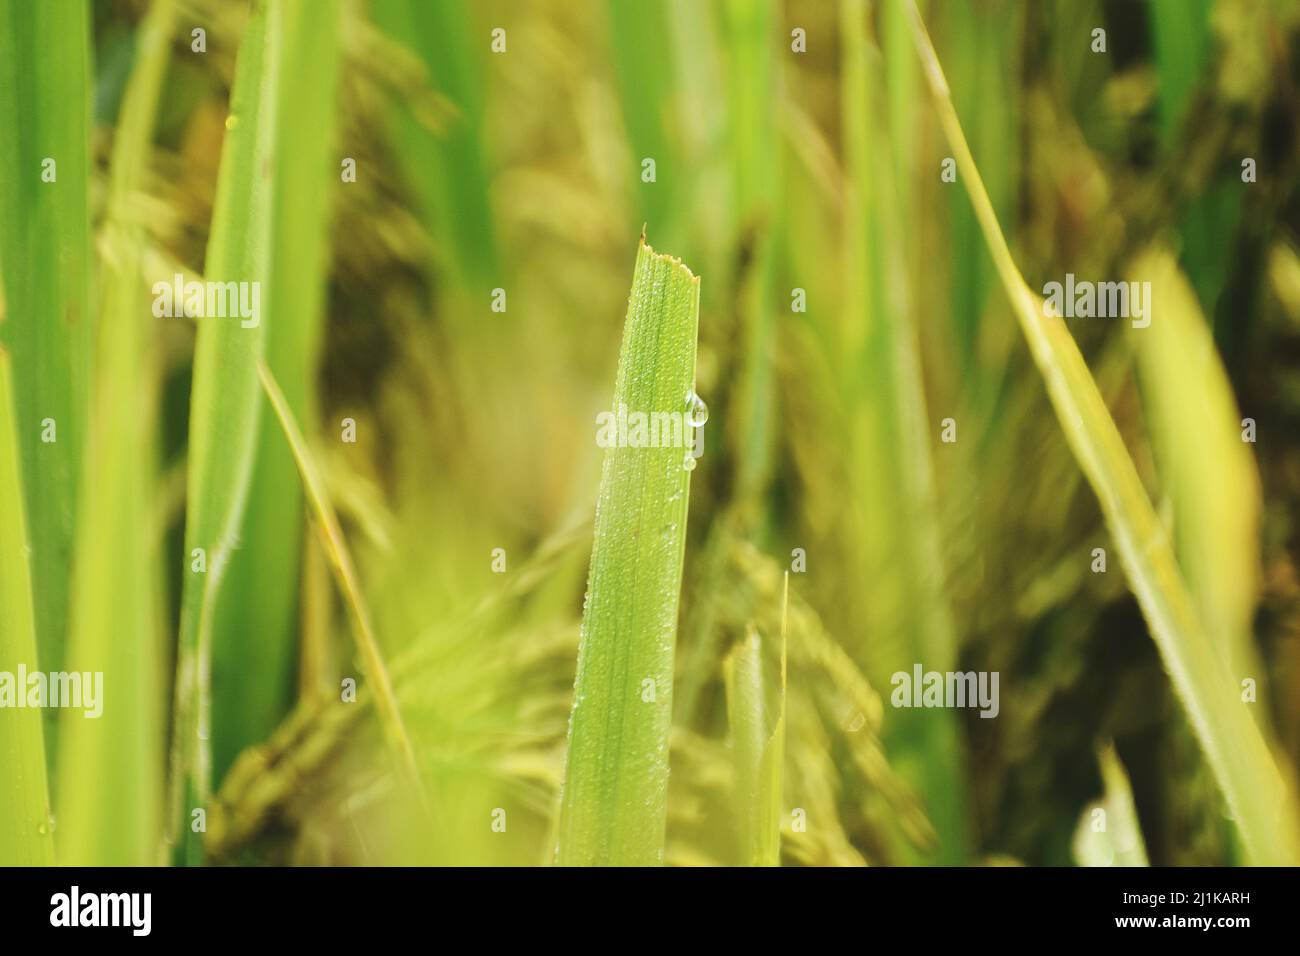 CULTIVATION OF RICE - PADDY Stock Photo